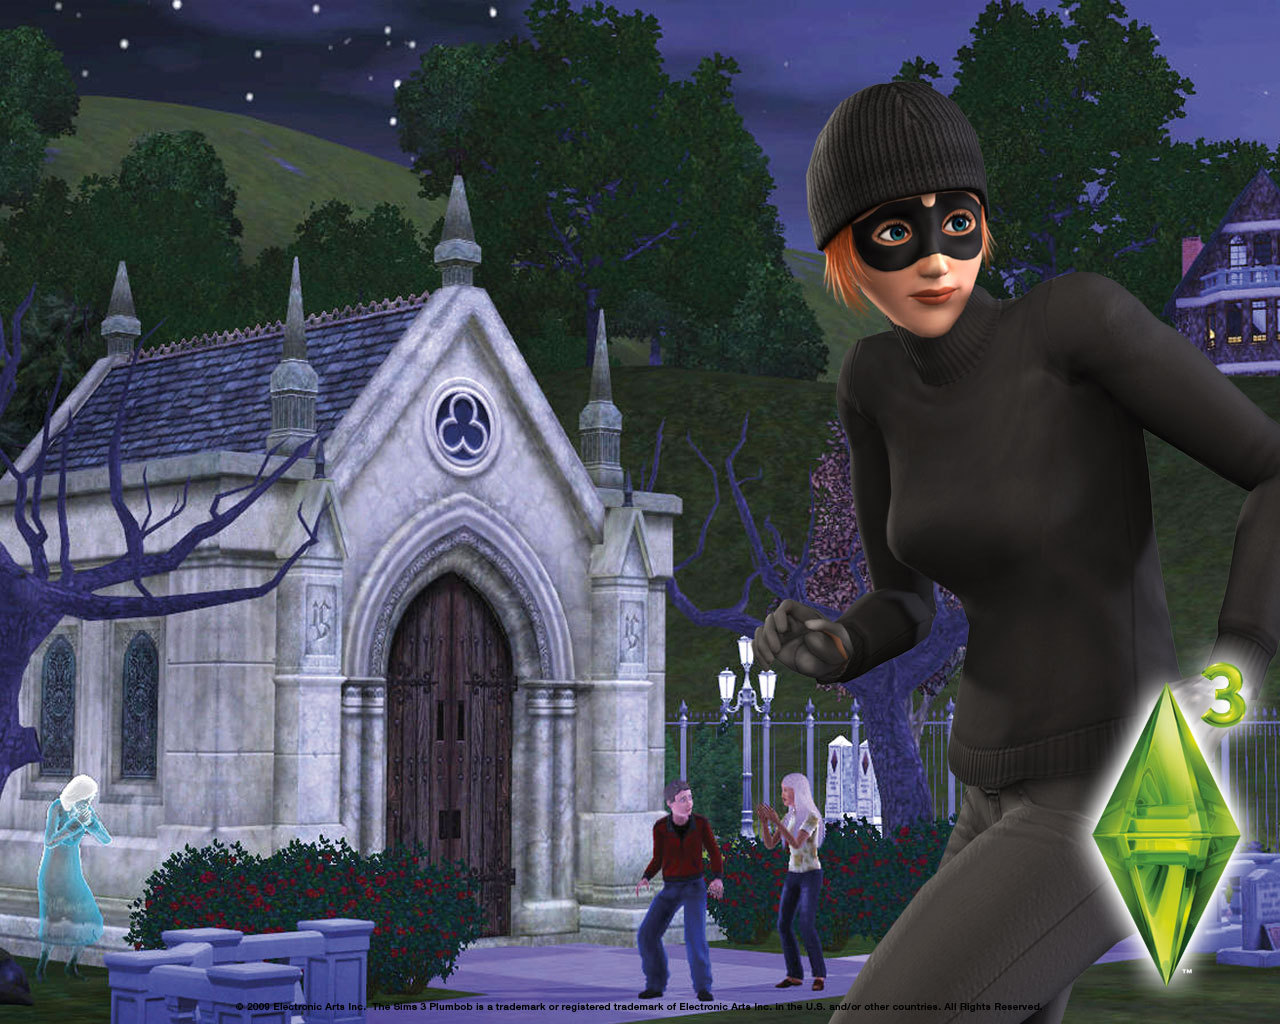 The Sims 3 - The Sims 3 Wallpaper (6605349) - Fanpop